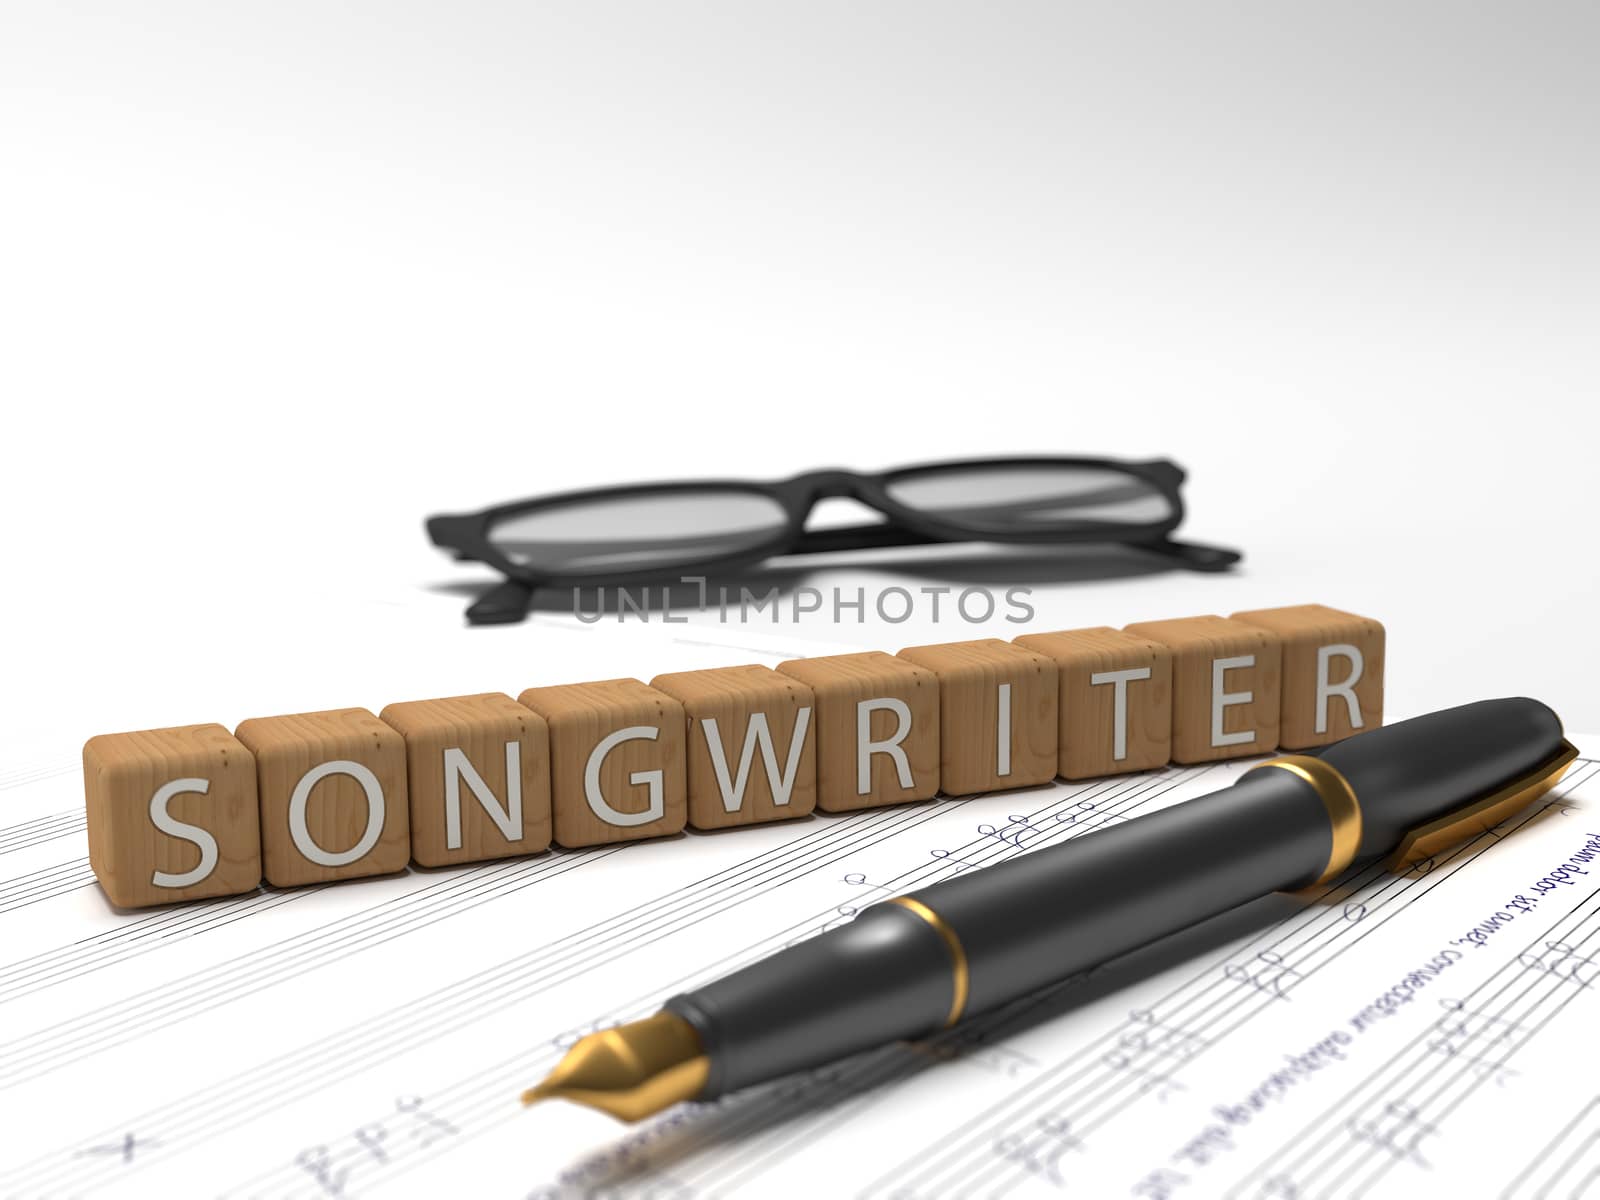 Songwriter - dices containing the word songwriter, a book, glasses and a fountain pen.